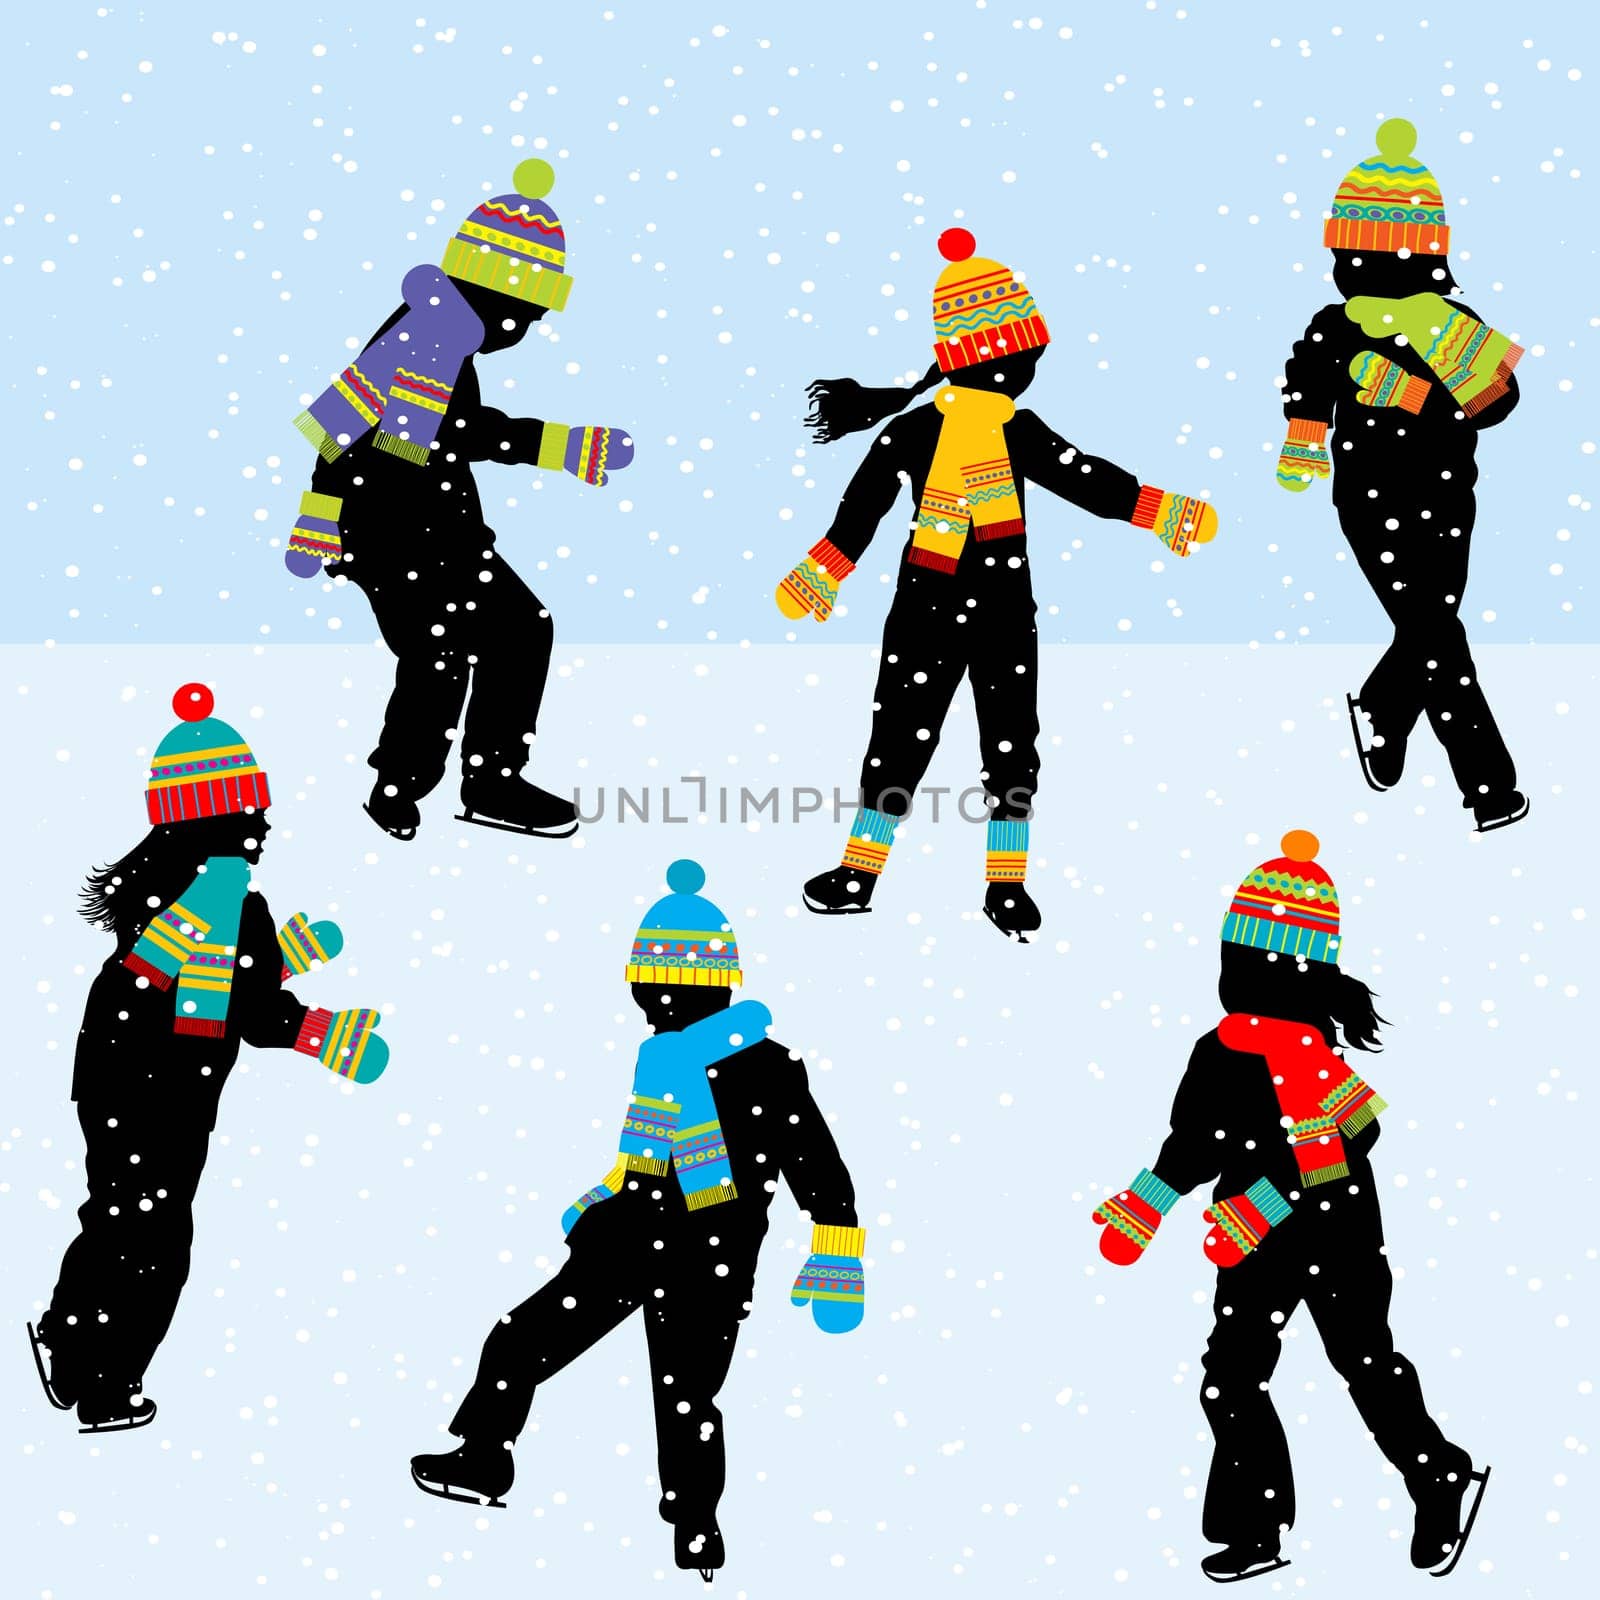 Kids ice skating silhouettes outdoor by hibrida13